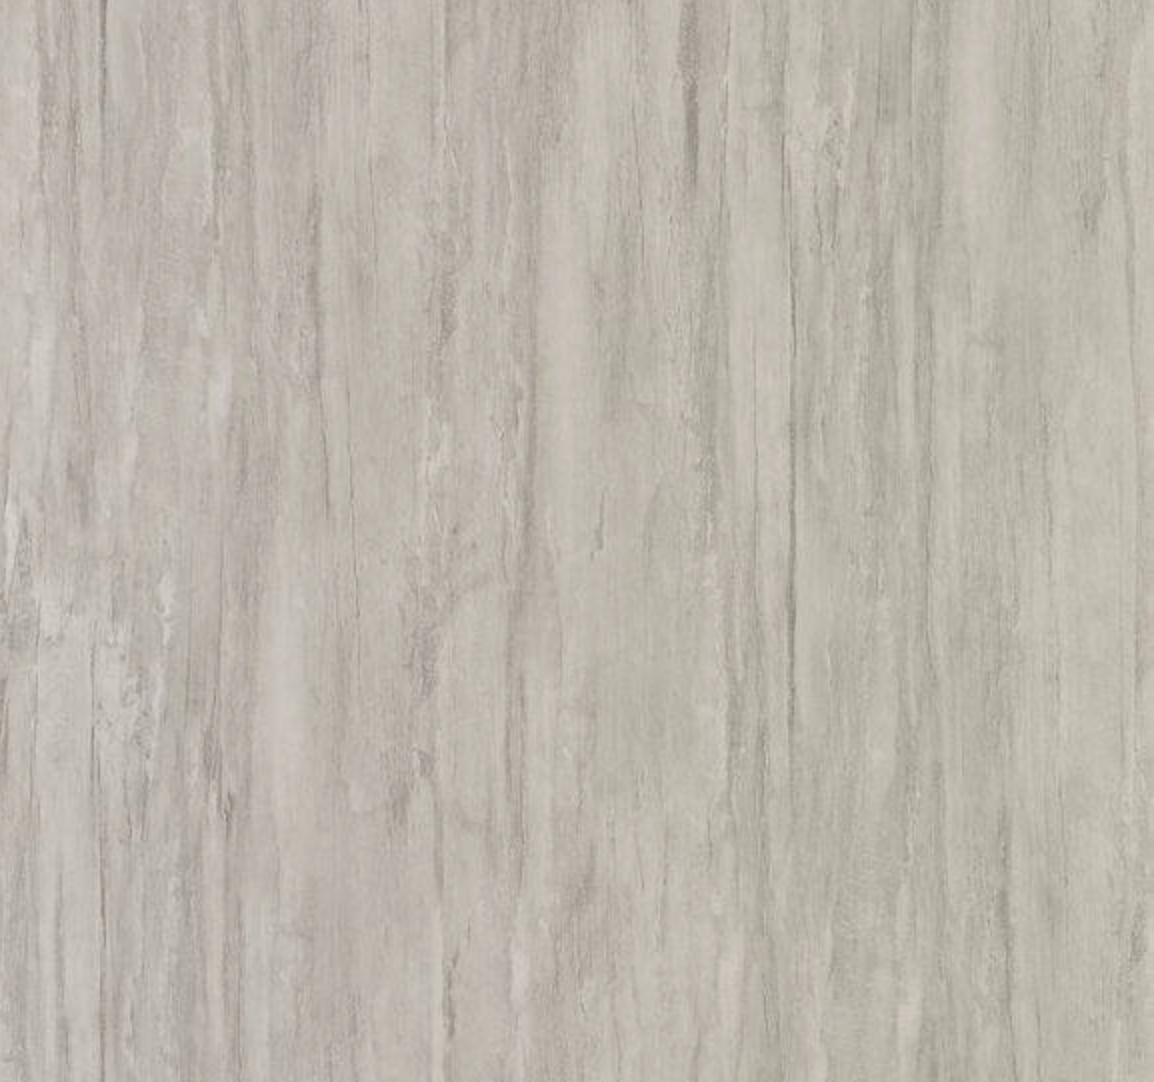 Showerwall Laminate Quarry Collection - White Charcoal